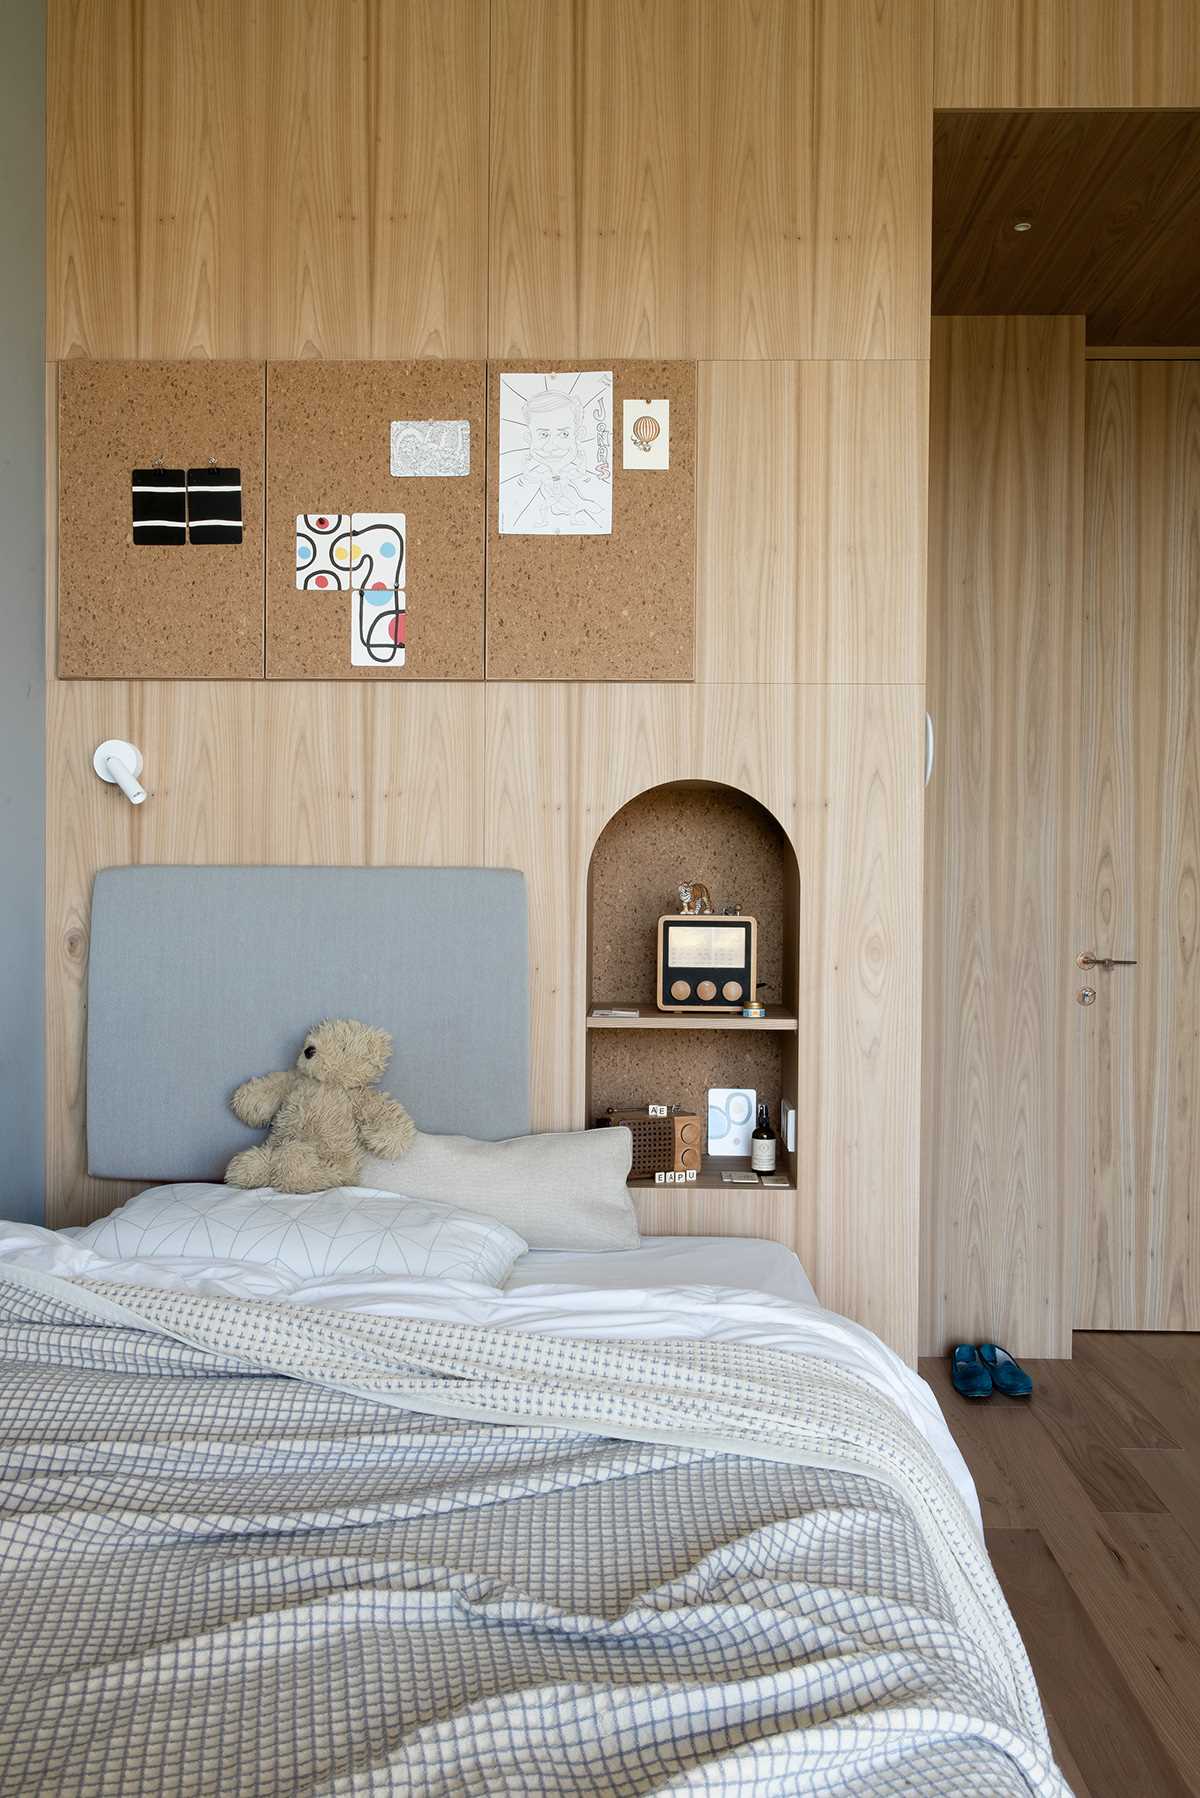 In a kid's bedroom, a small niche with a shelf acts as a bedside table.